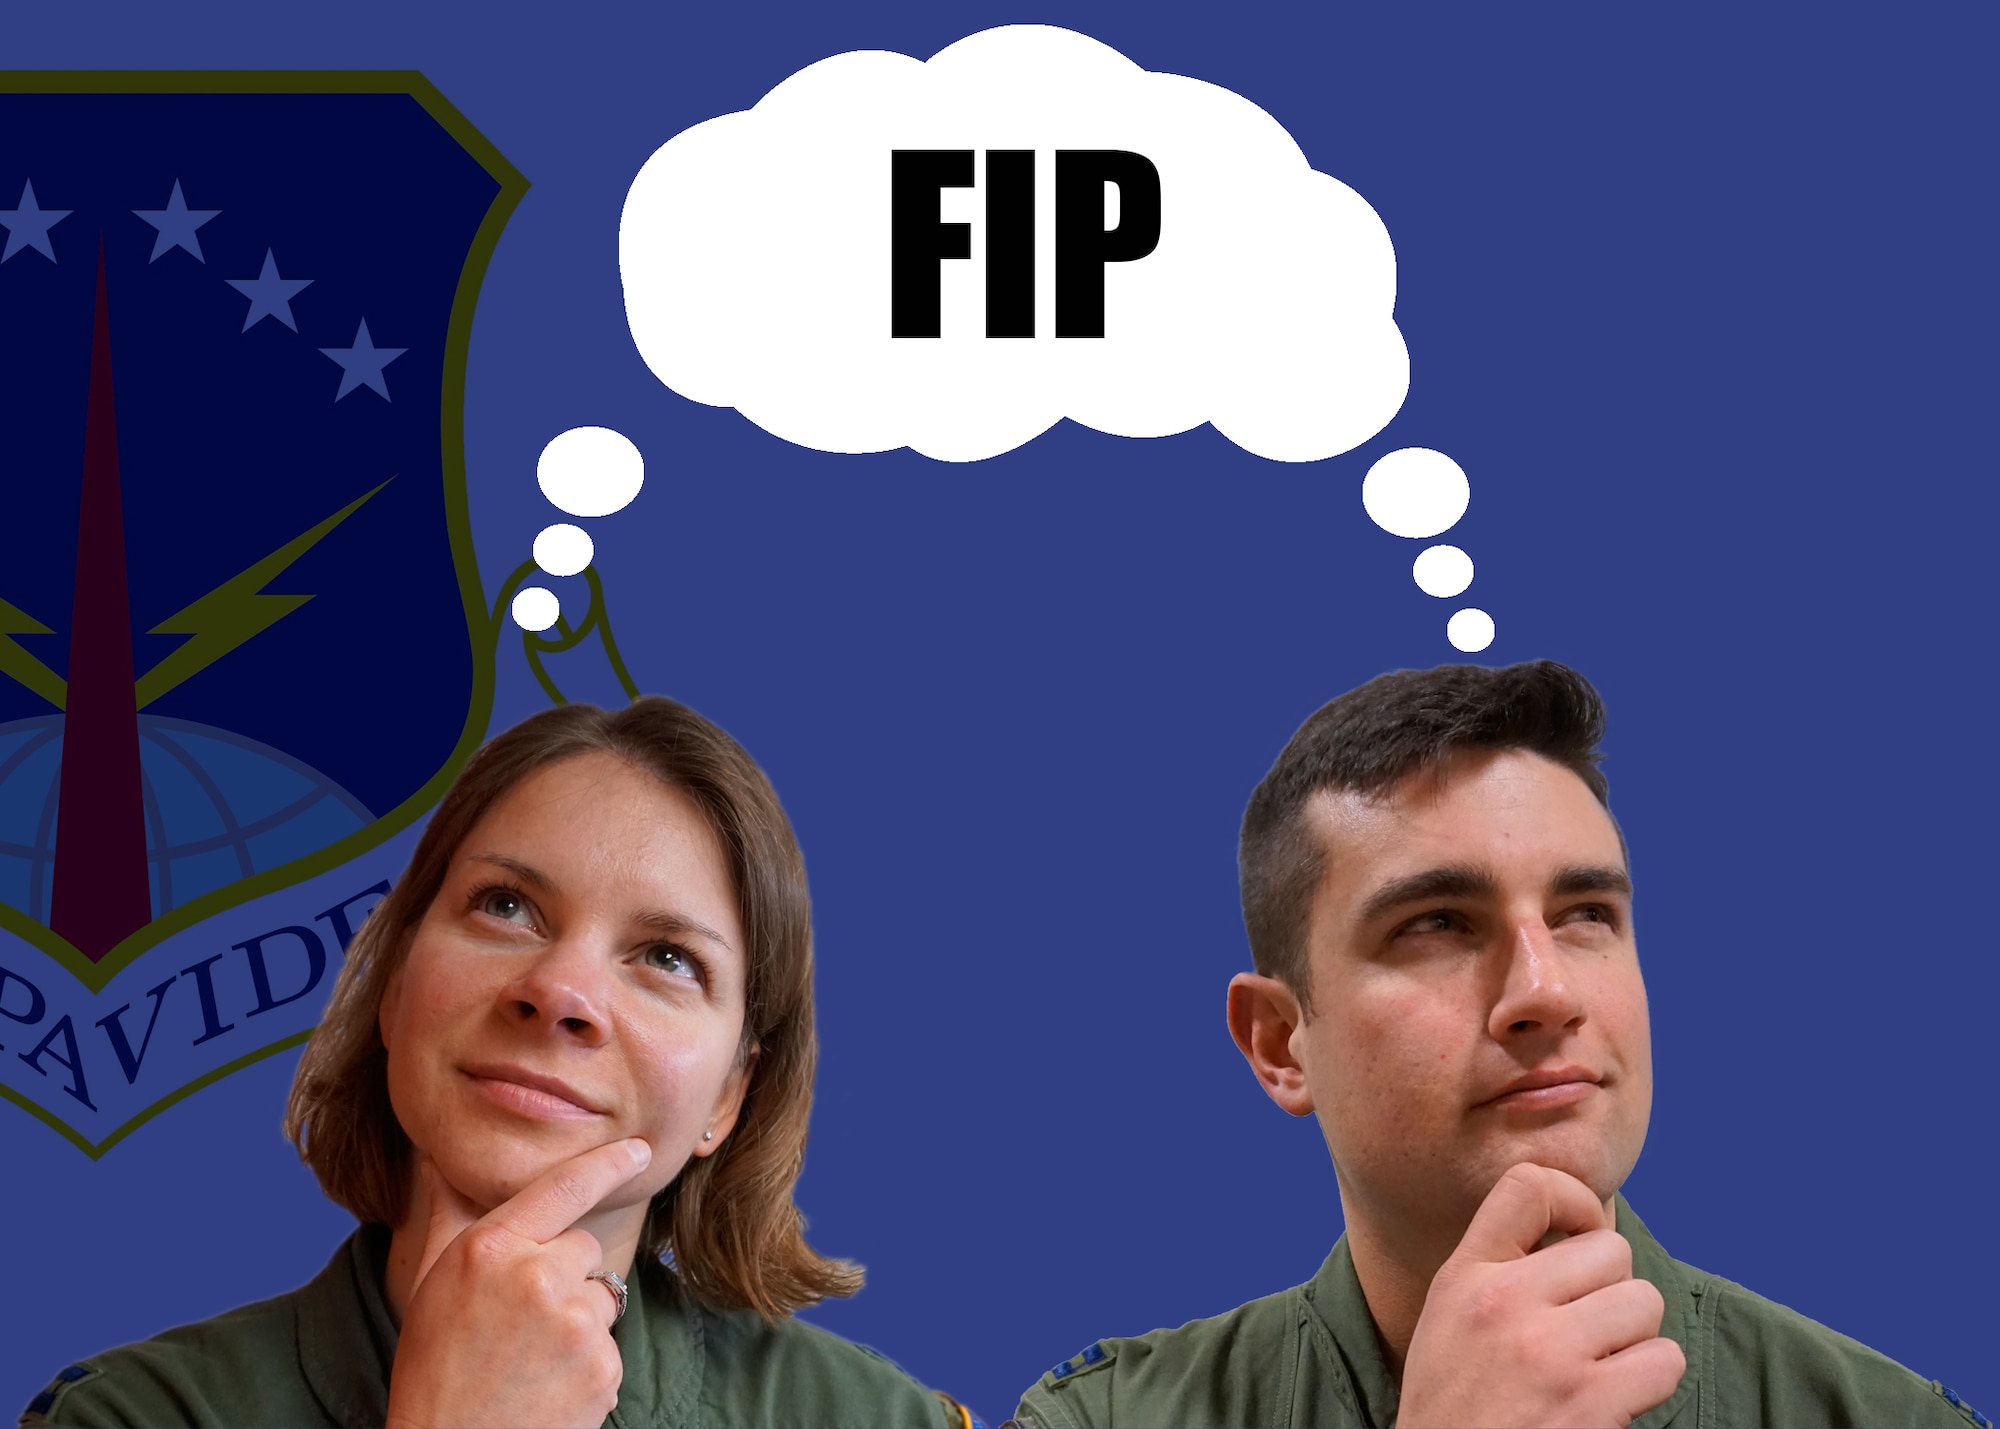 Capt. Amanda Filiowich, 320th Missile Squadron, and Capt. David Skelly, 37th Helicopter Squadron, ponder about their thoughts on the Force Improvement Program. FIP is an aggressive grass-roots feedback program designed to quickly provide senior Air Force leaders with actionable recommendations for improvement by conducting one-on-one interviews and surveys with Airmen. The feedback received so far has brought changes to a variety of career fields vital to the nuclear deterence mission and has been positively received by those affected. (U.S. Air Force graphic/Lan Kim)